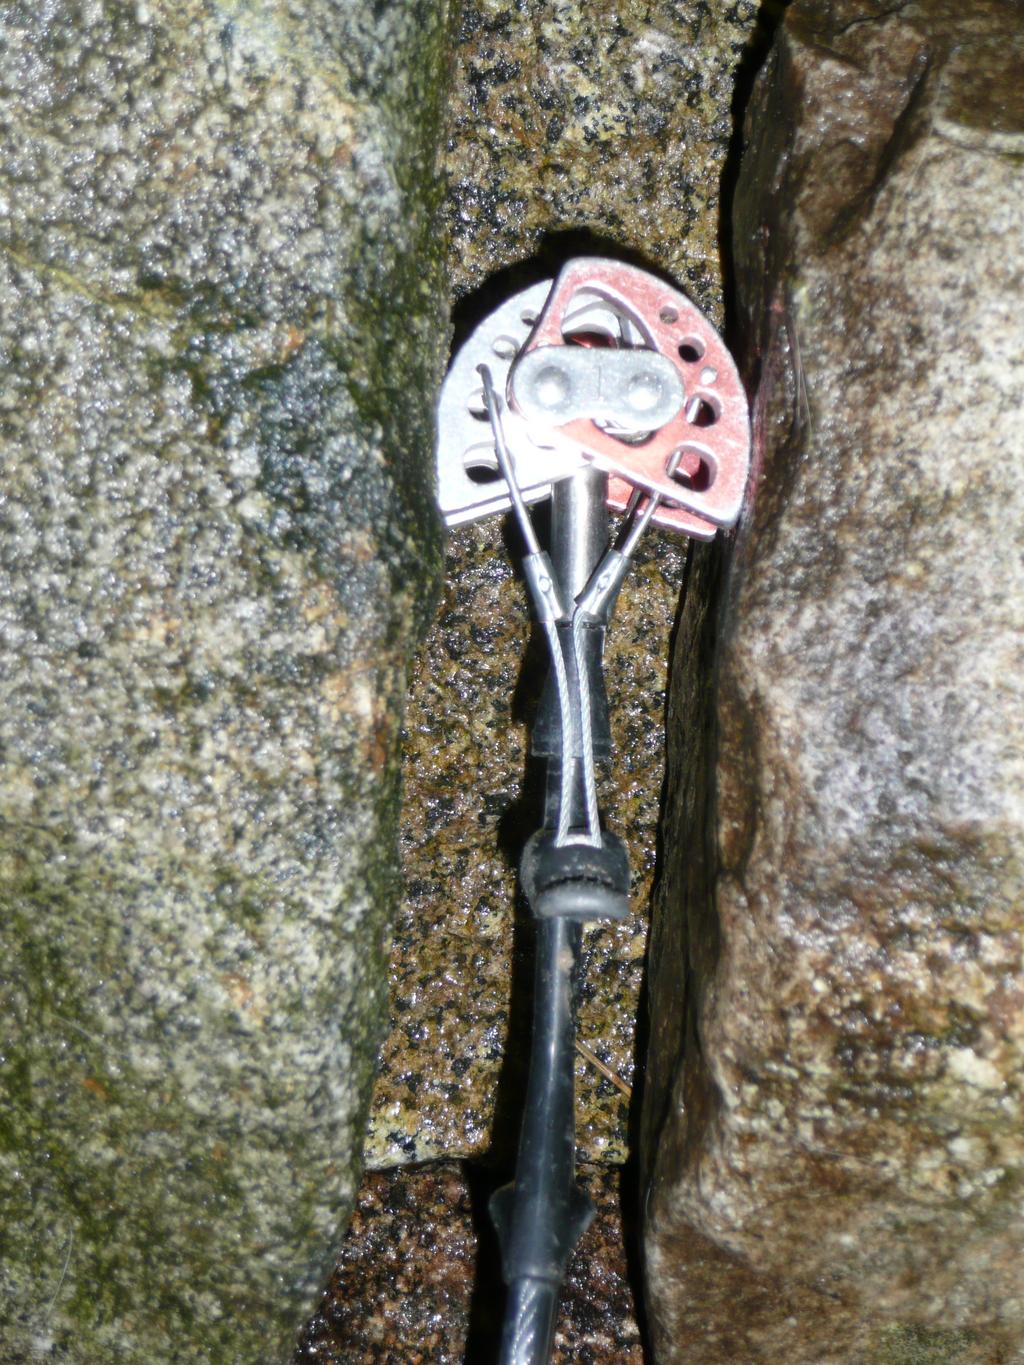 It should not loosen or even come out when wiggling the wire. A well placed cam should contact the rock at low to mid expansion range: 50% to 90% retracted.